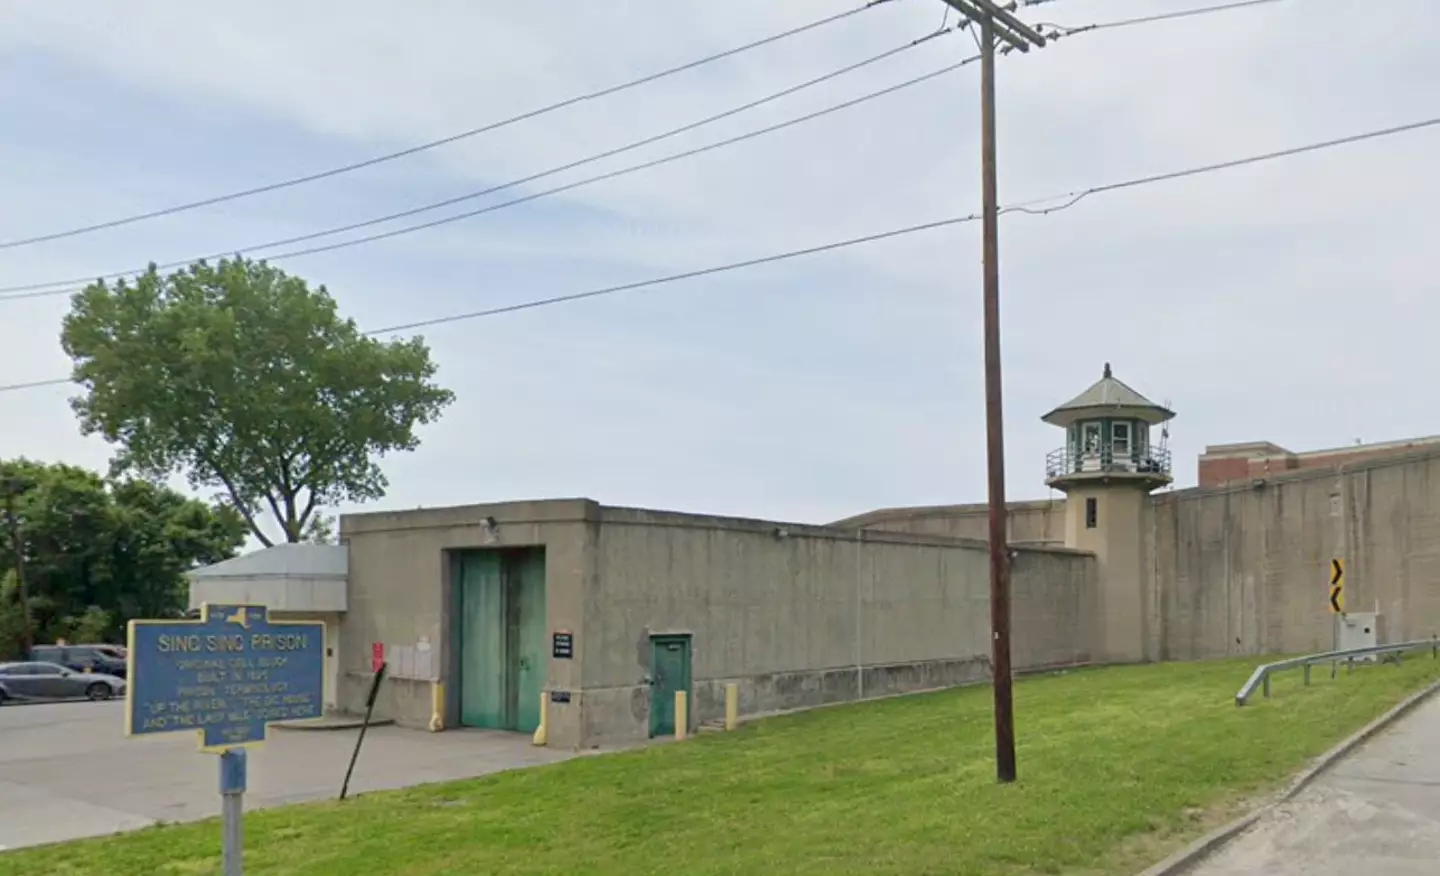 Two phones were reportedly retrieved from Sing Sing Correctional Facility.